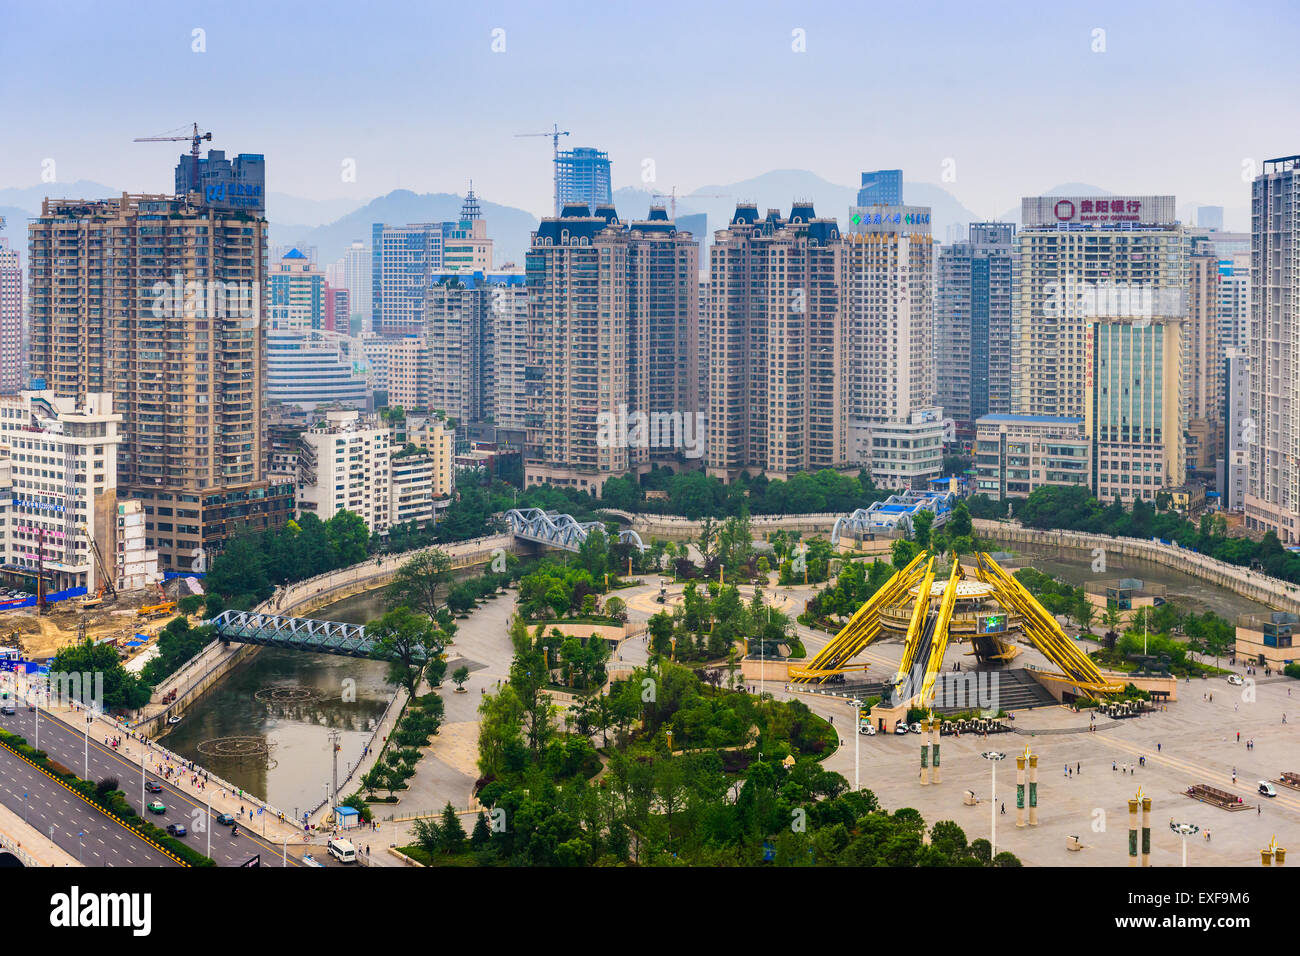 Cityscape over People's Square in downtown Guiyang, China. Stock Photo